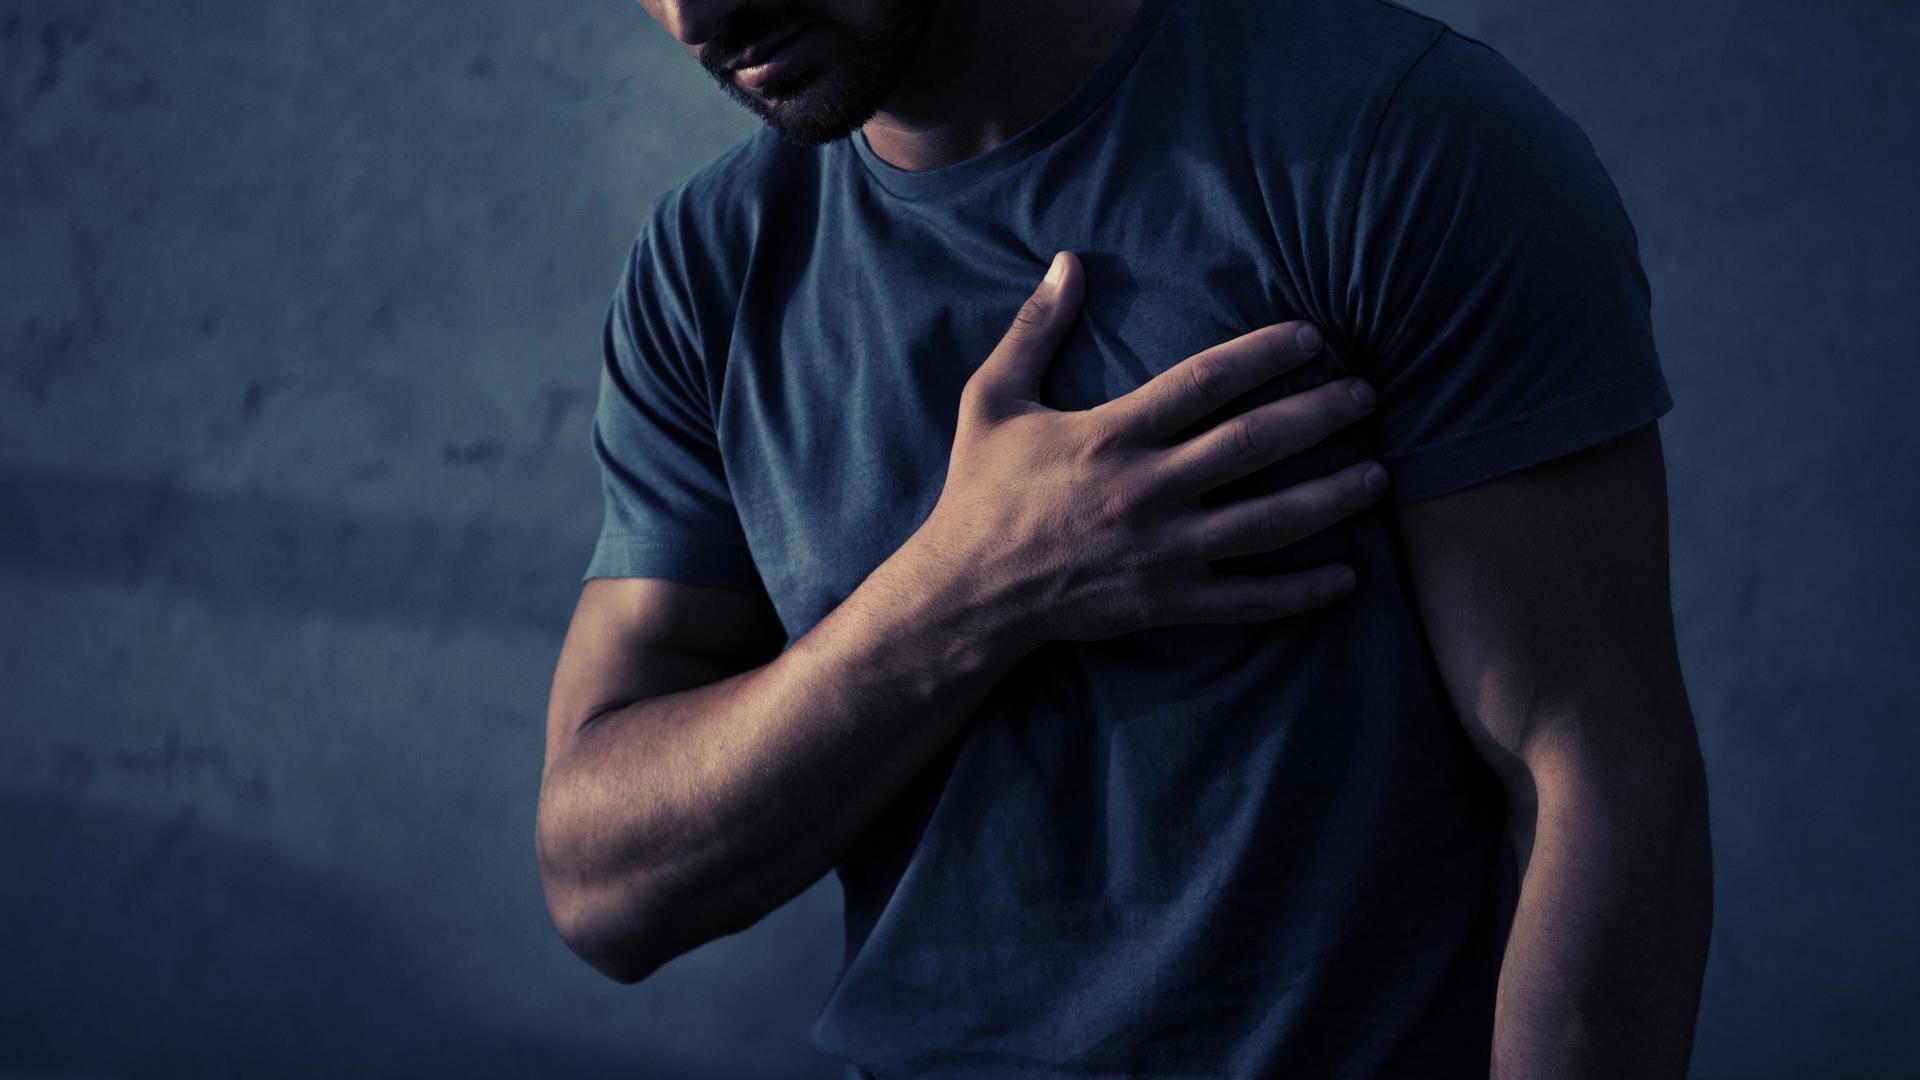 Expert reveals why young people are dying of heart attacks